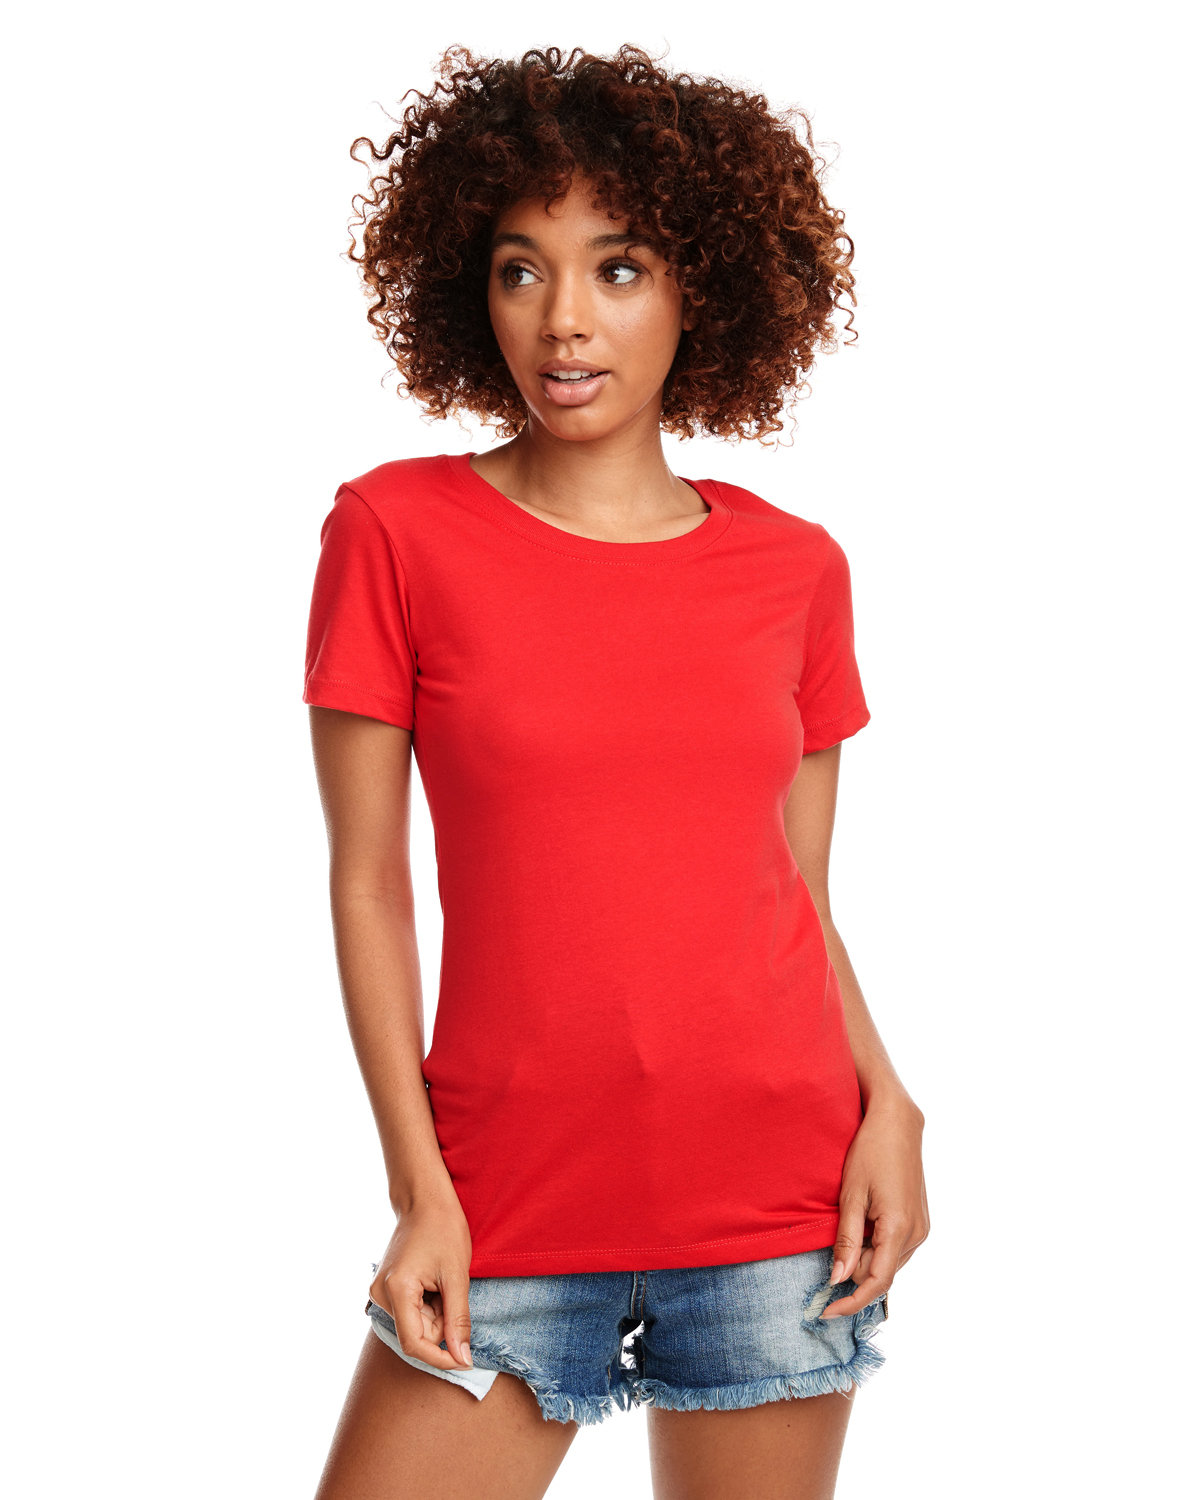 Next Level Apparel Ladies' Ideal T-Shirt RED 